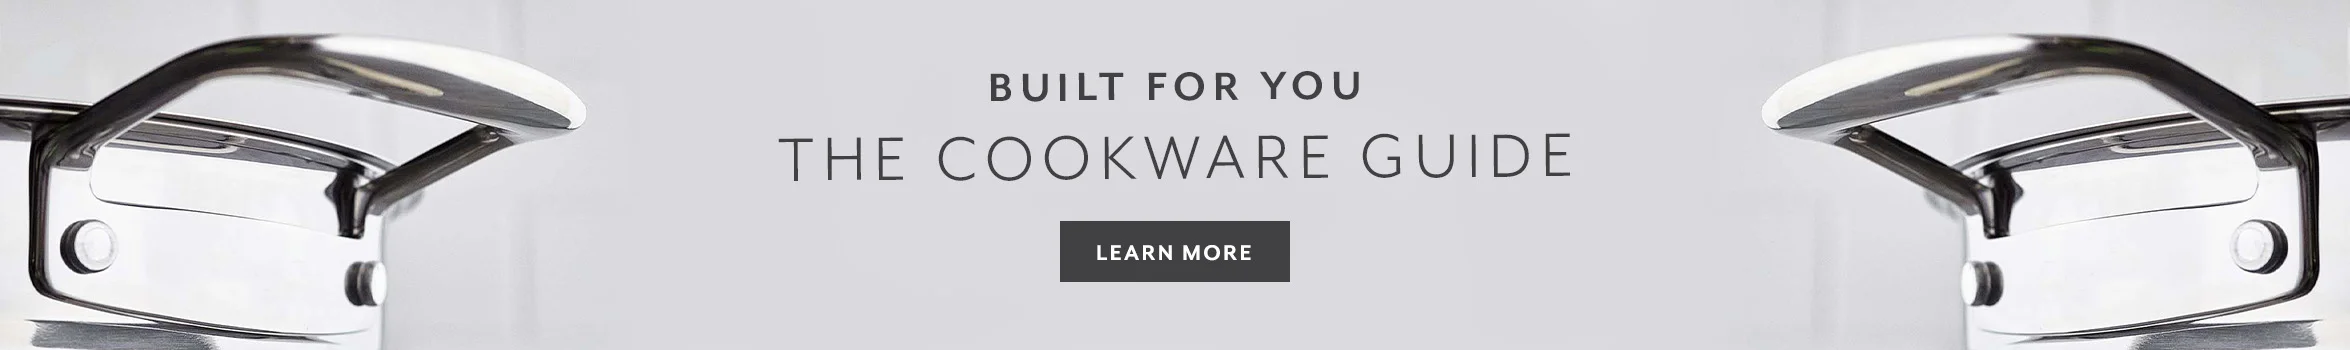 Built for you, cookware guide. Learn More.